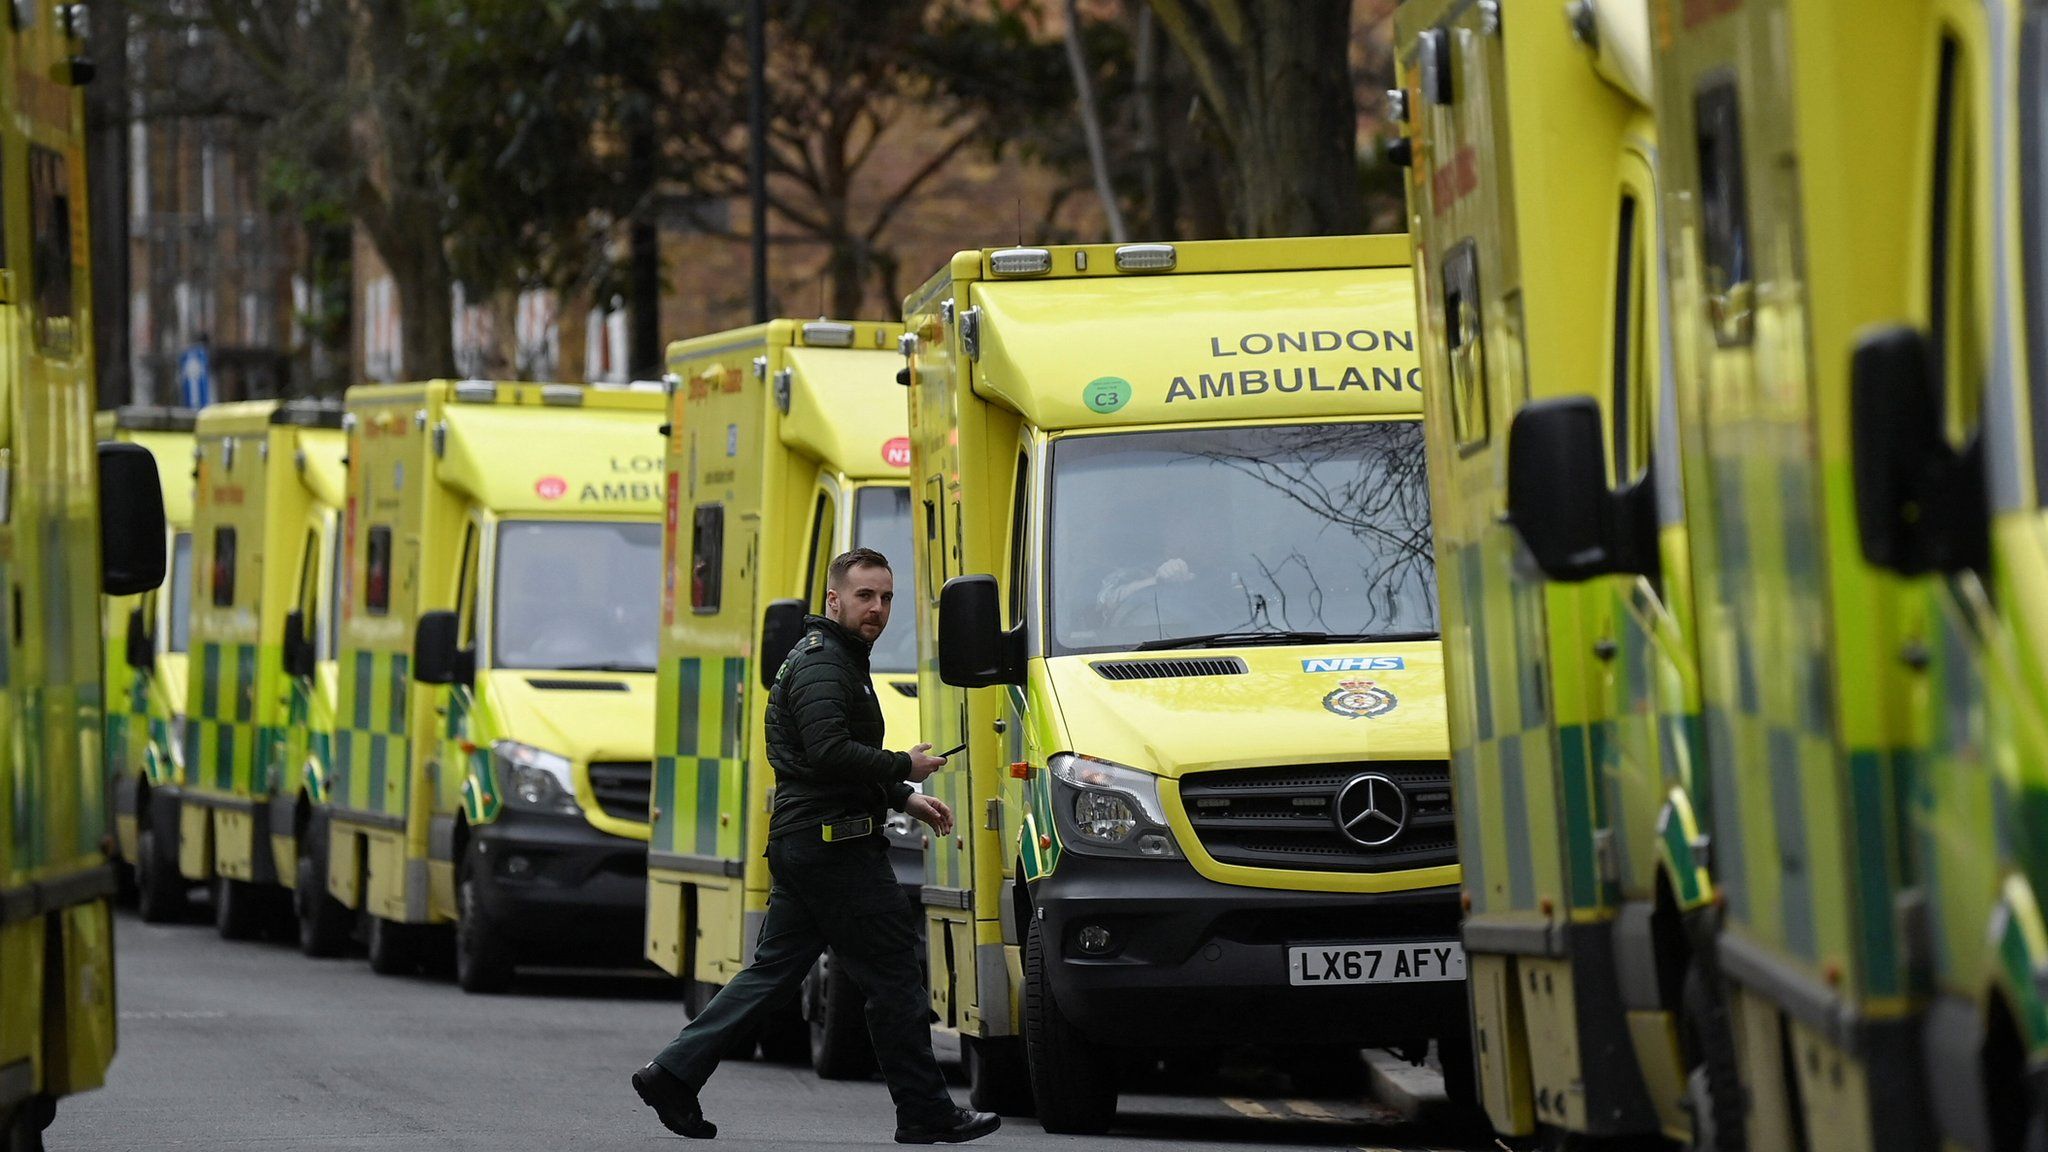 Ambulances lined up during a strike in London